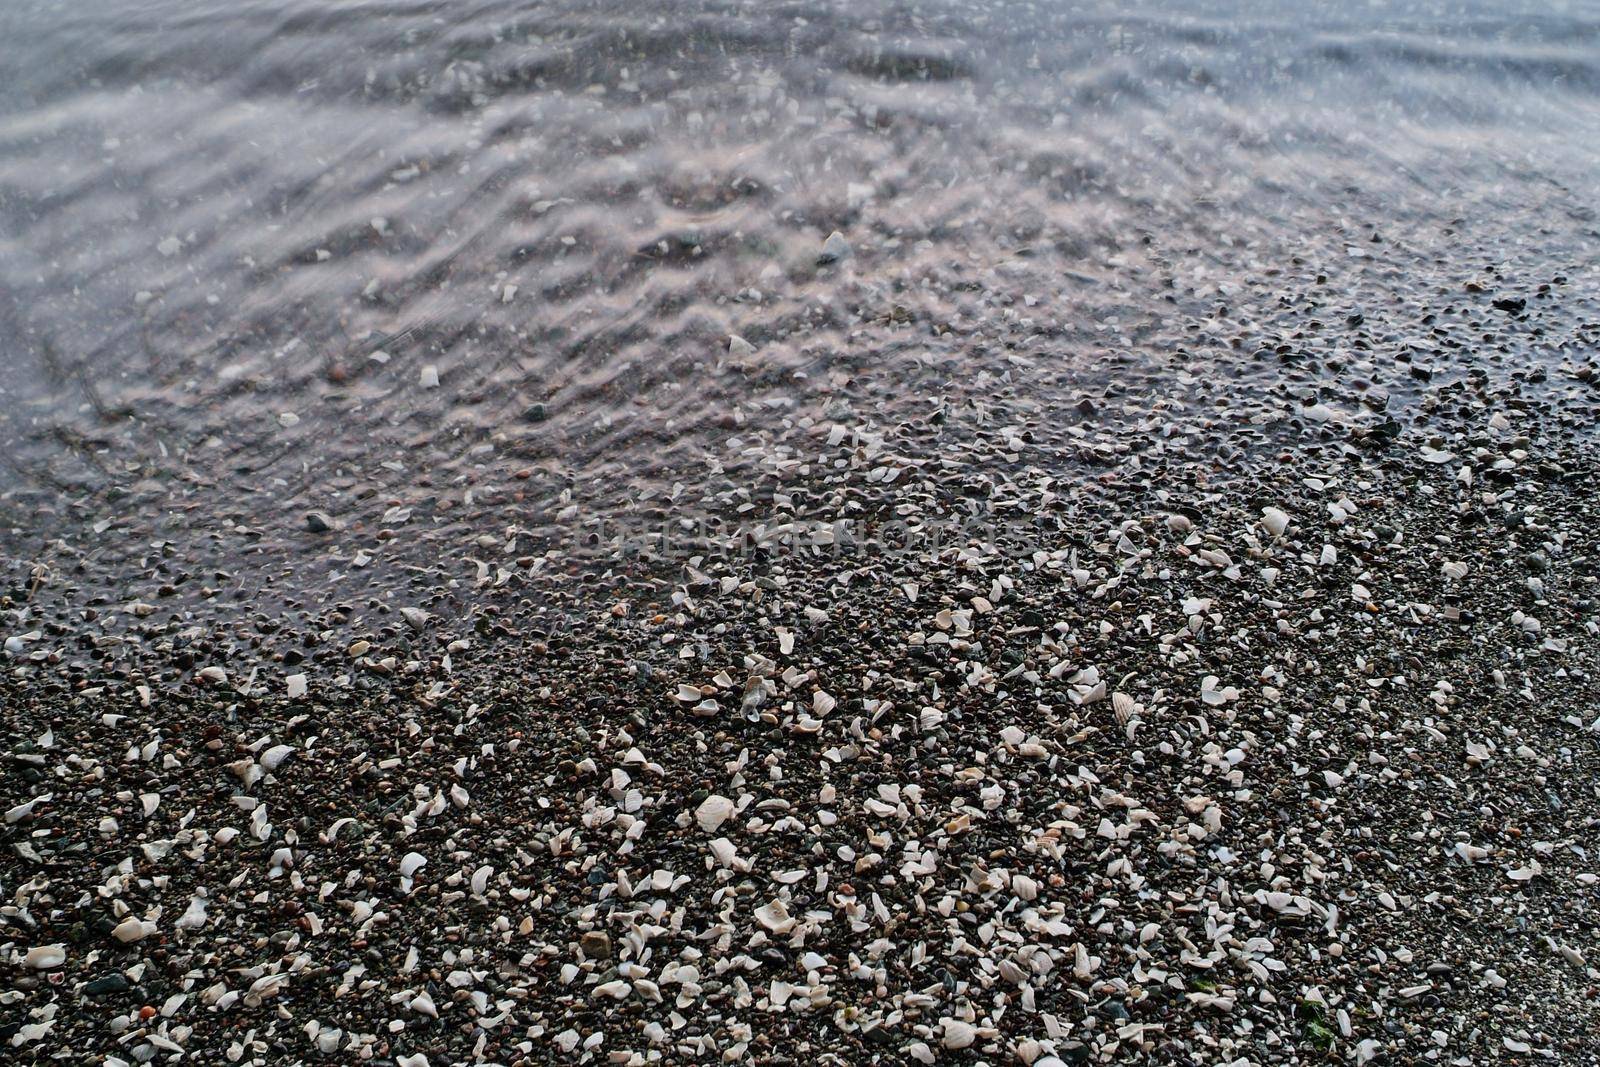 Ocean Water Meeting Pebbled Beach BAckground Texture from Ruckle Park on Salt Spring Island. High quality photo